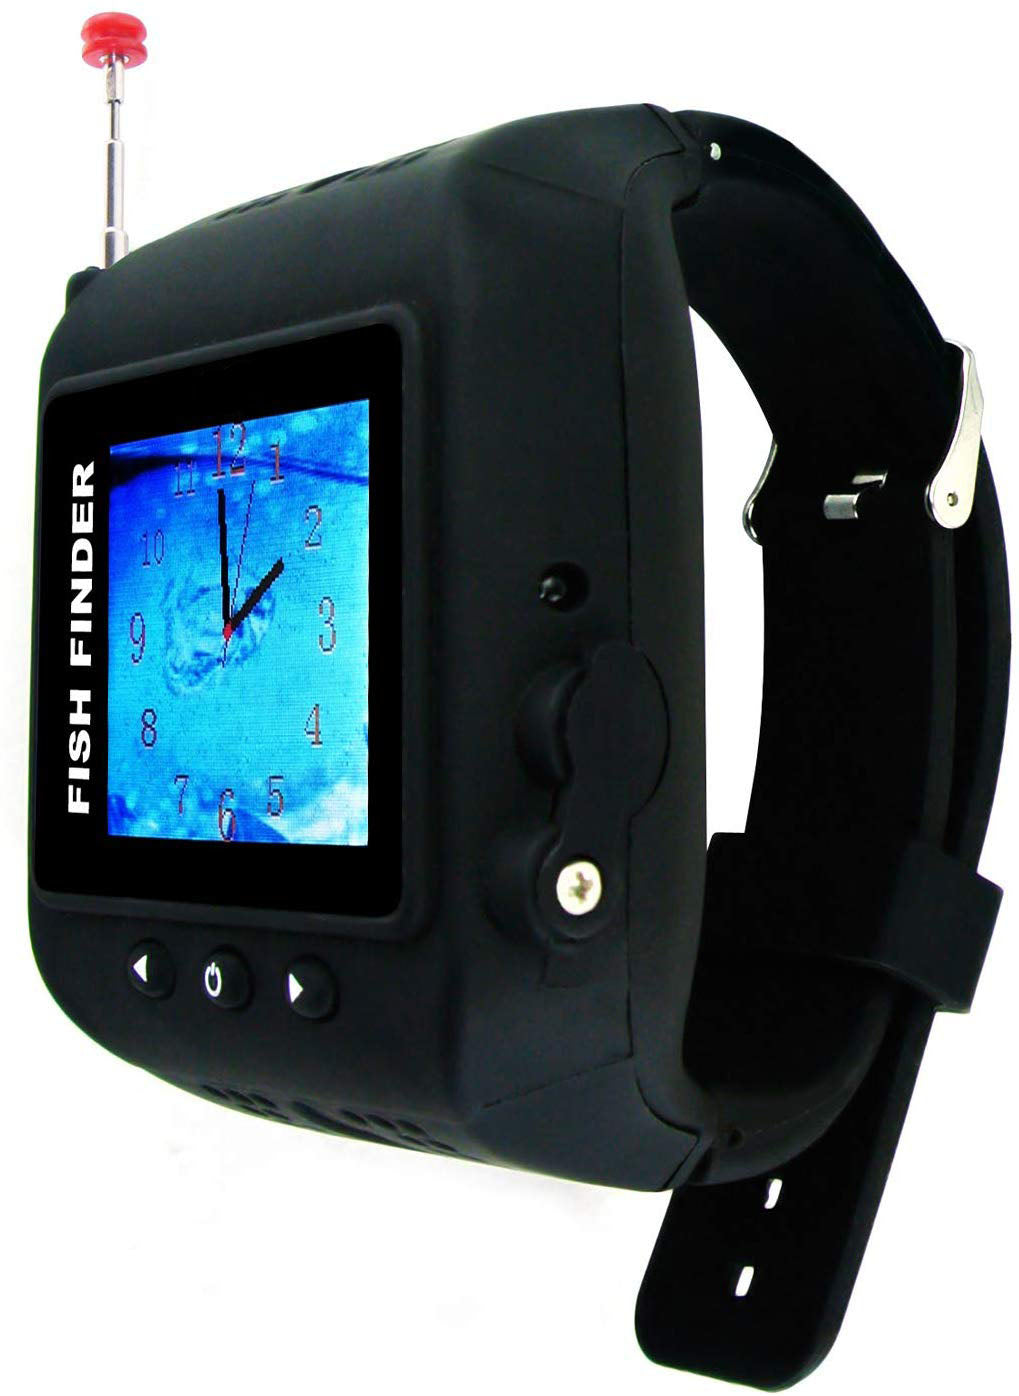 Ice Fishing Wireless Color Fish & Depth Finder Wrist Watch - All